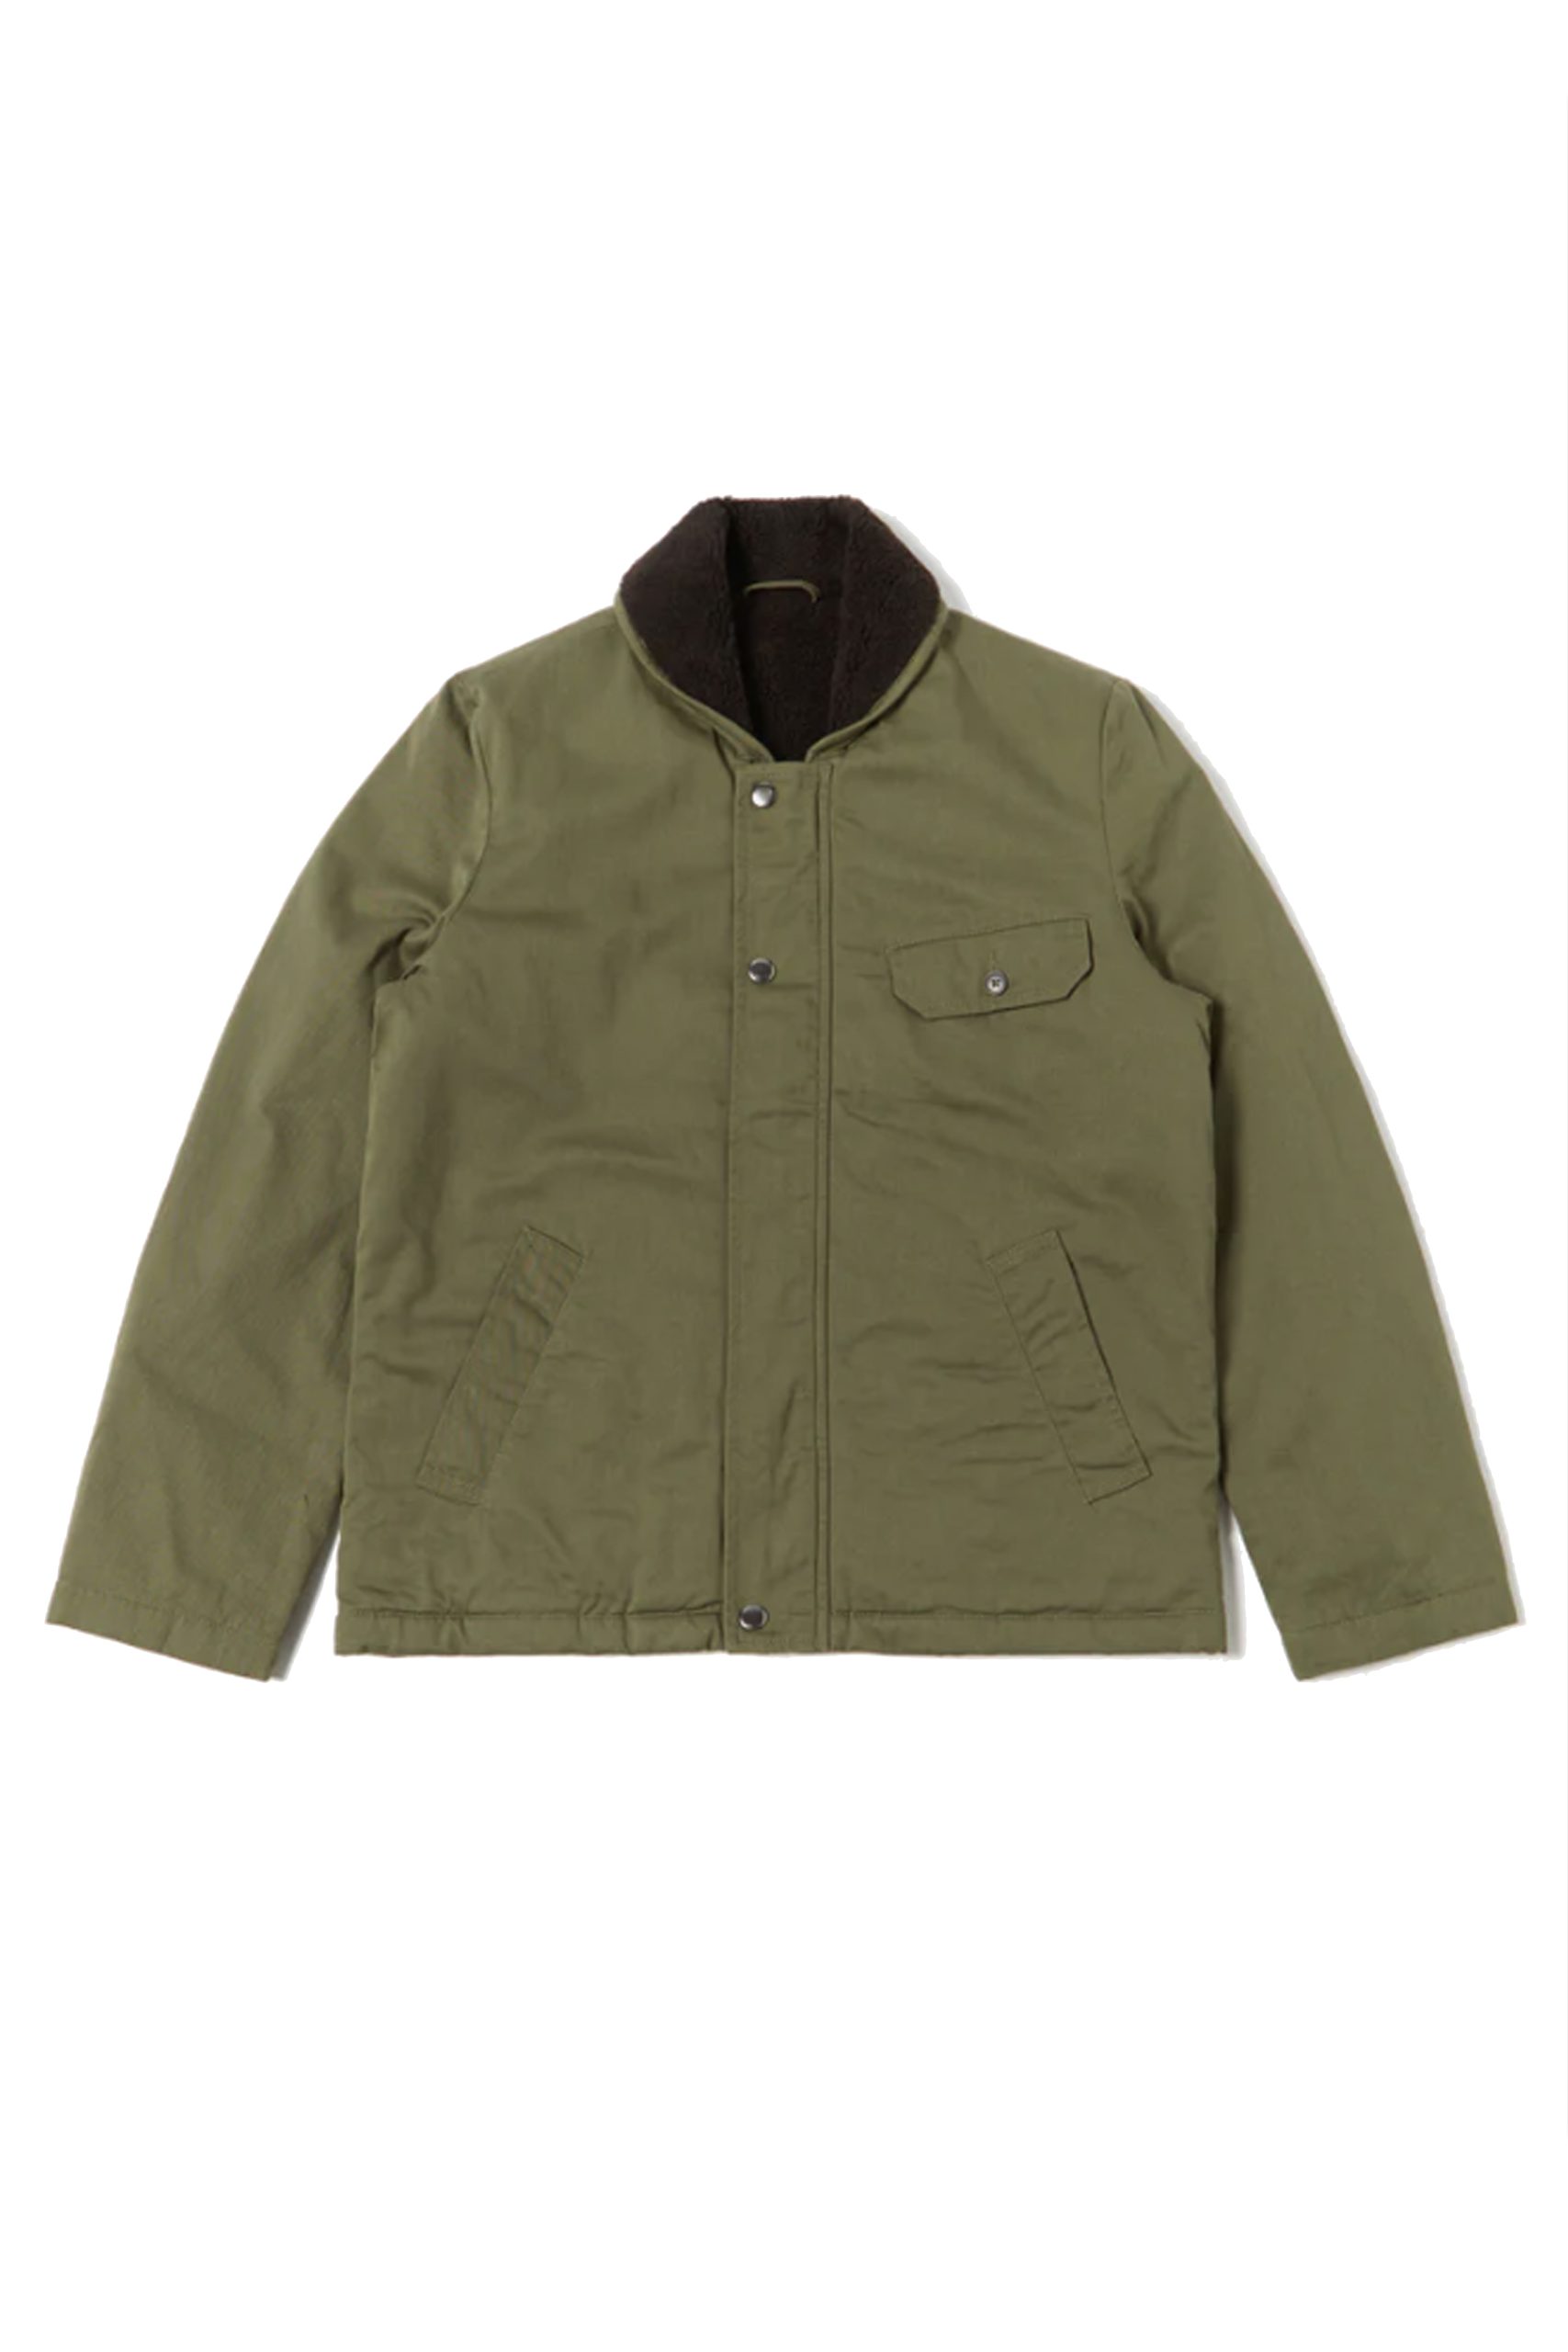 UNIVERSAL WORKS Reversible N1 Jacket in light olive Twill/ Sherp